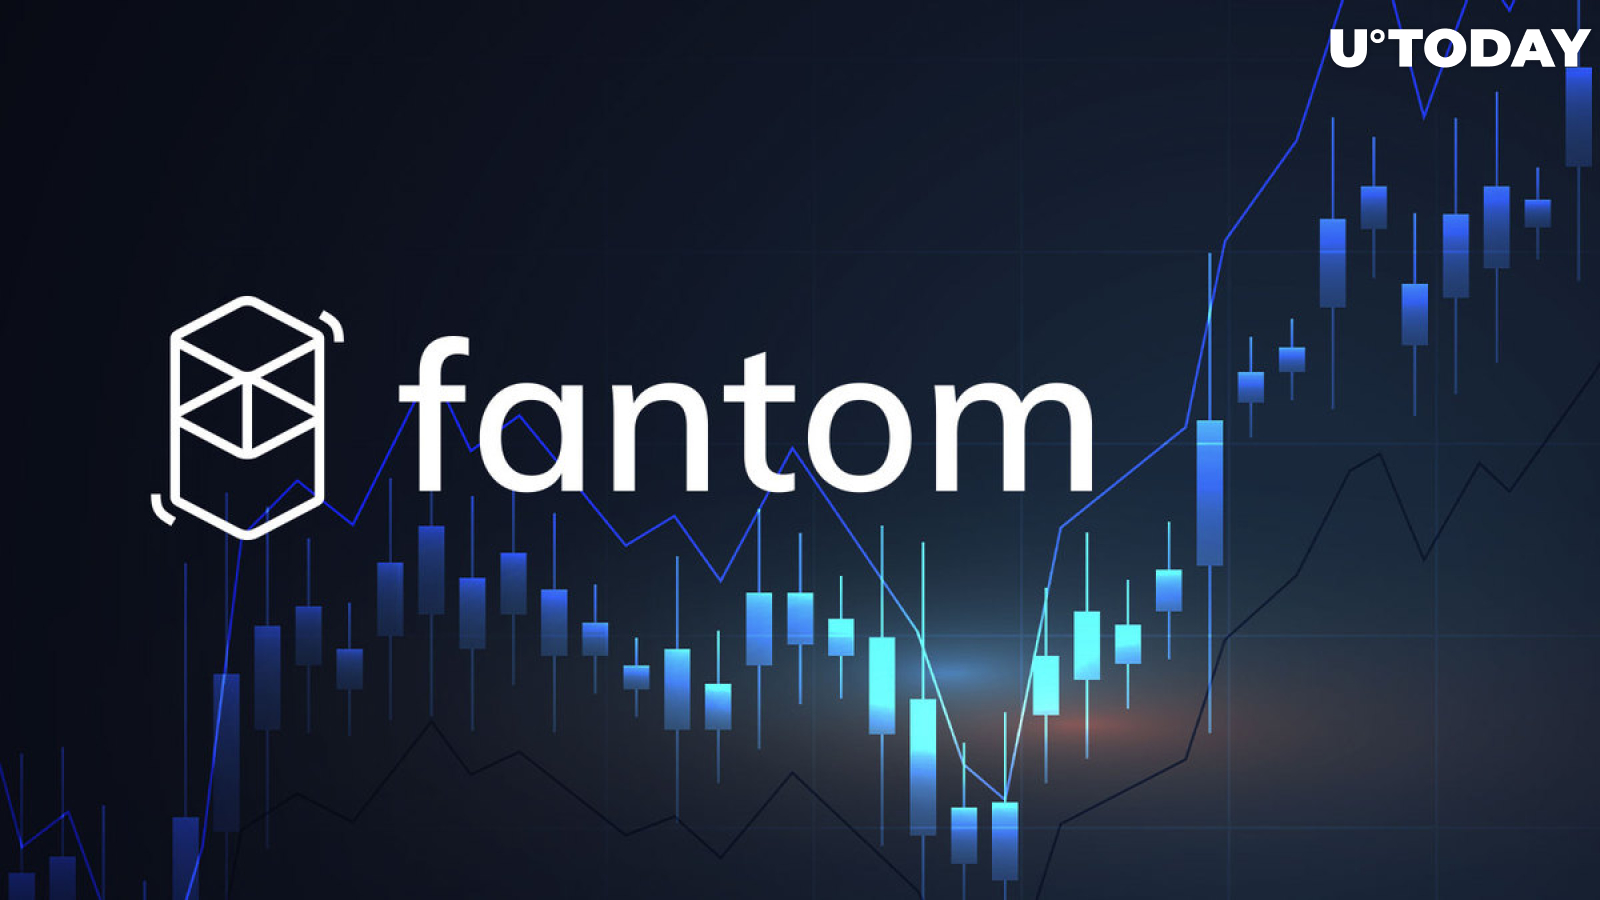 Fantom Blockchain: FTM Coin Price is on an Uptrend, What’s Next?